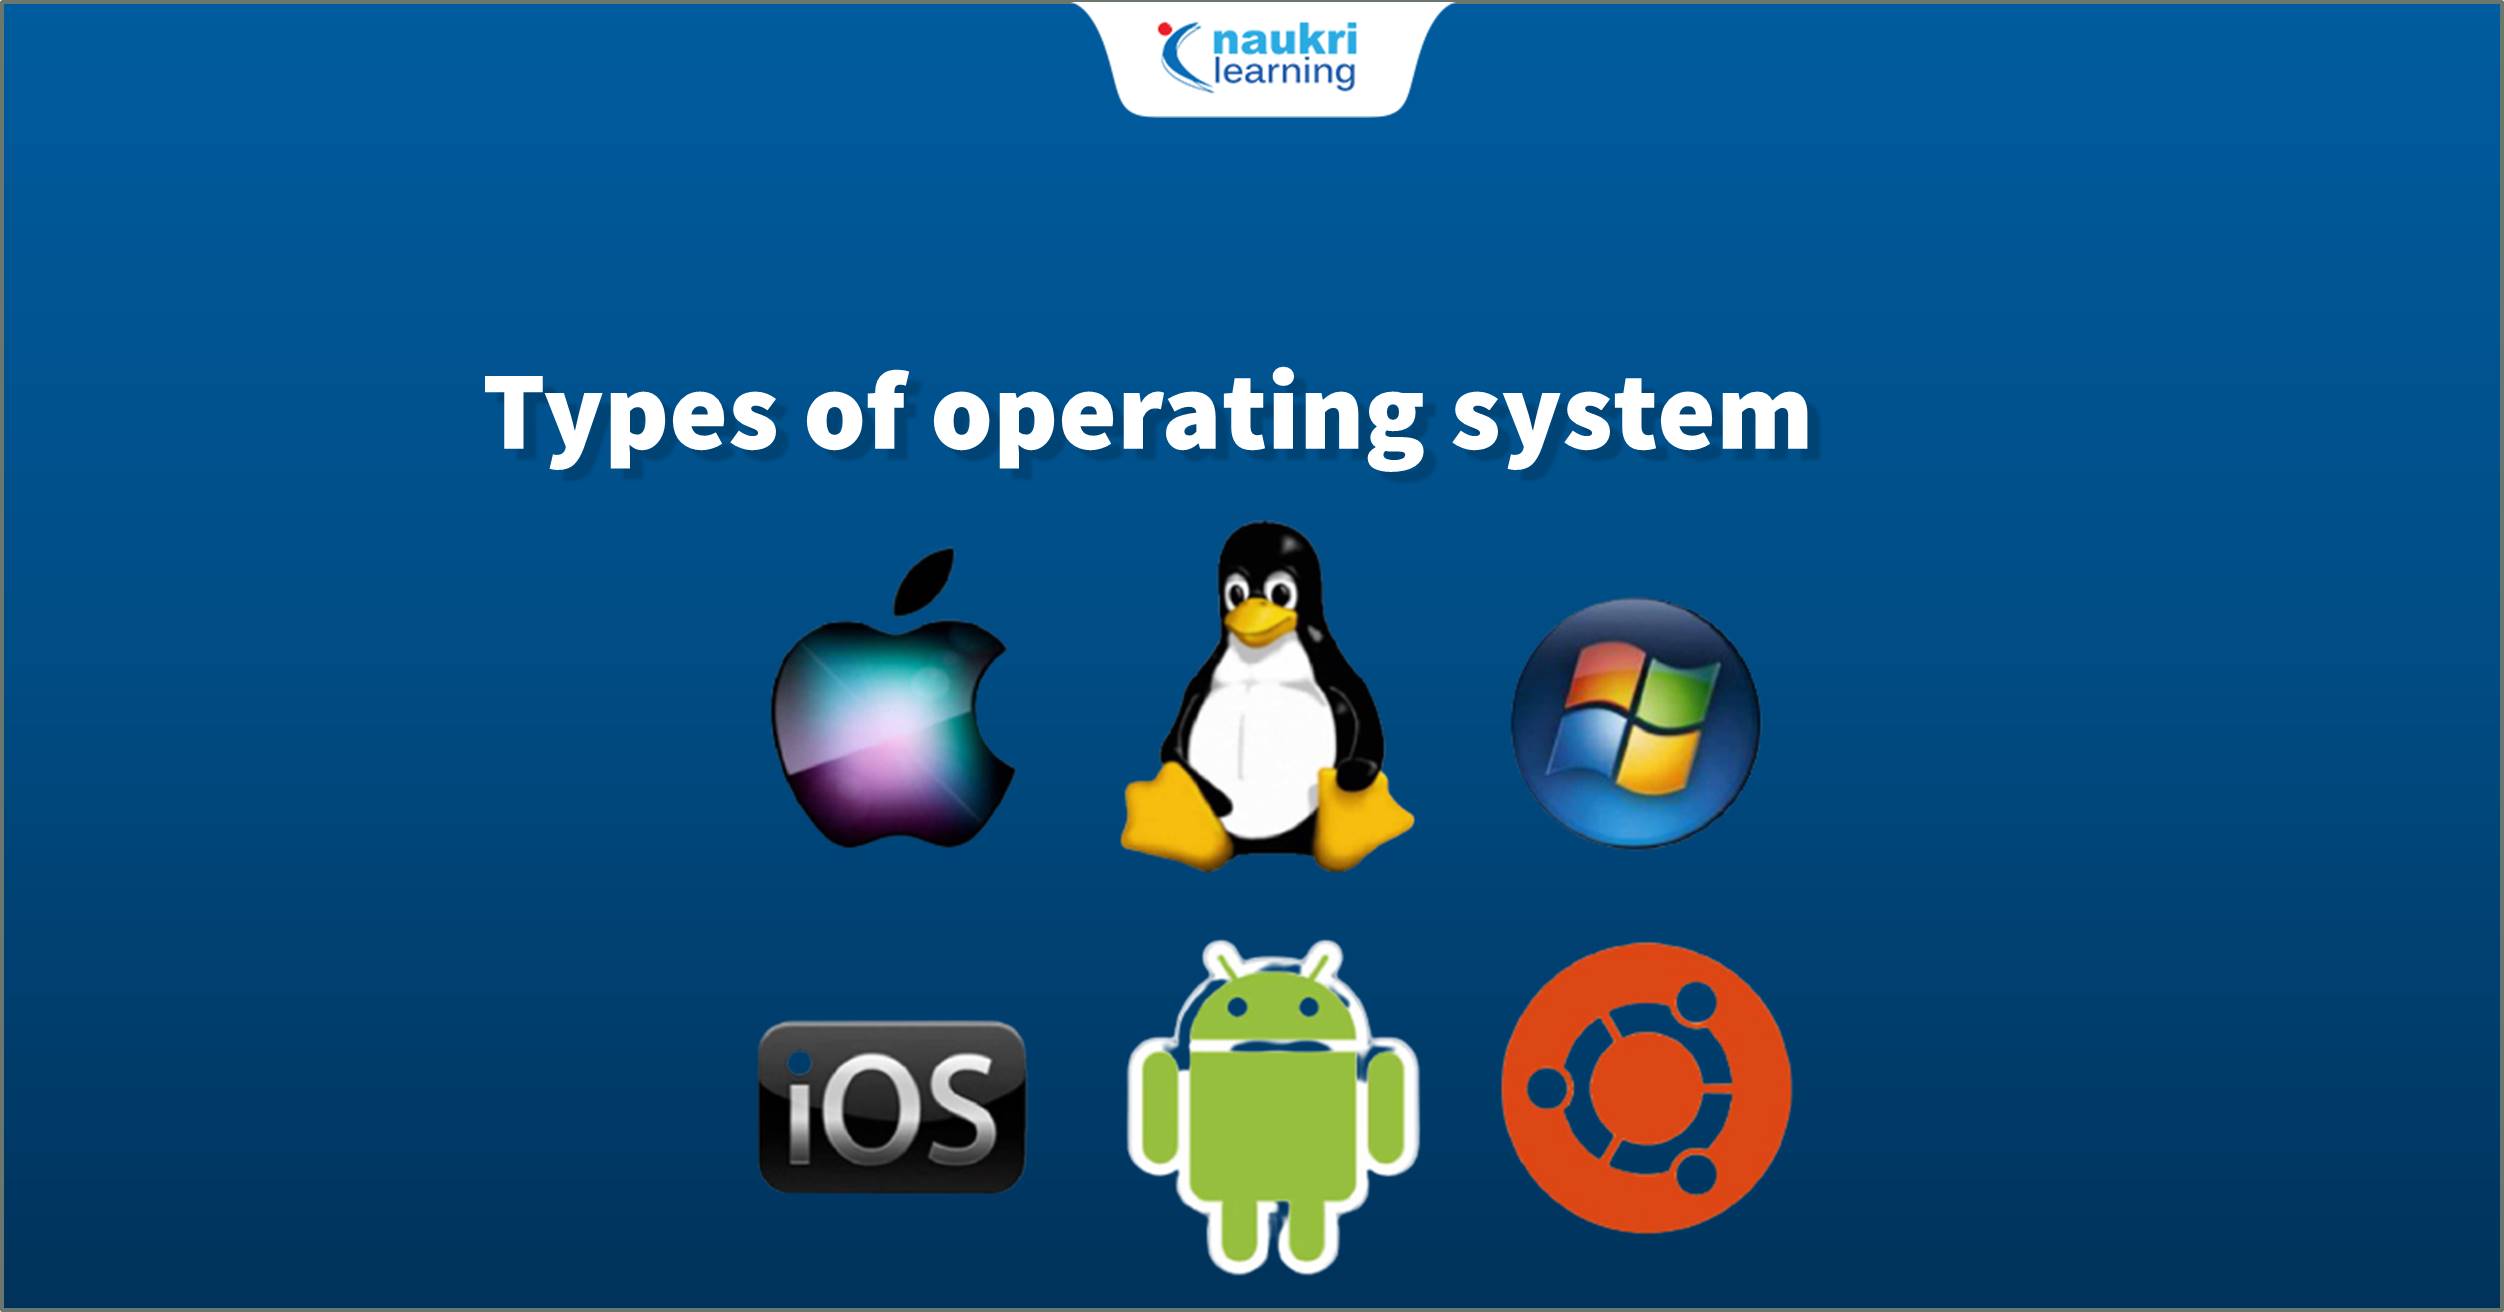 Operating System (OS)